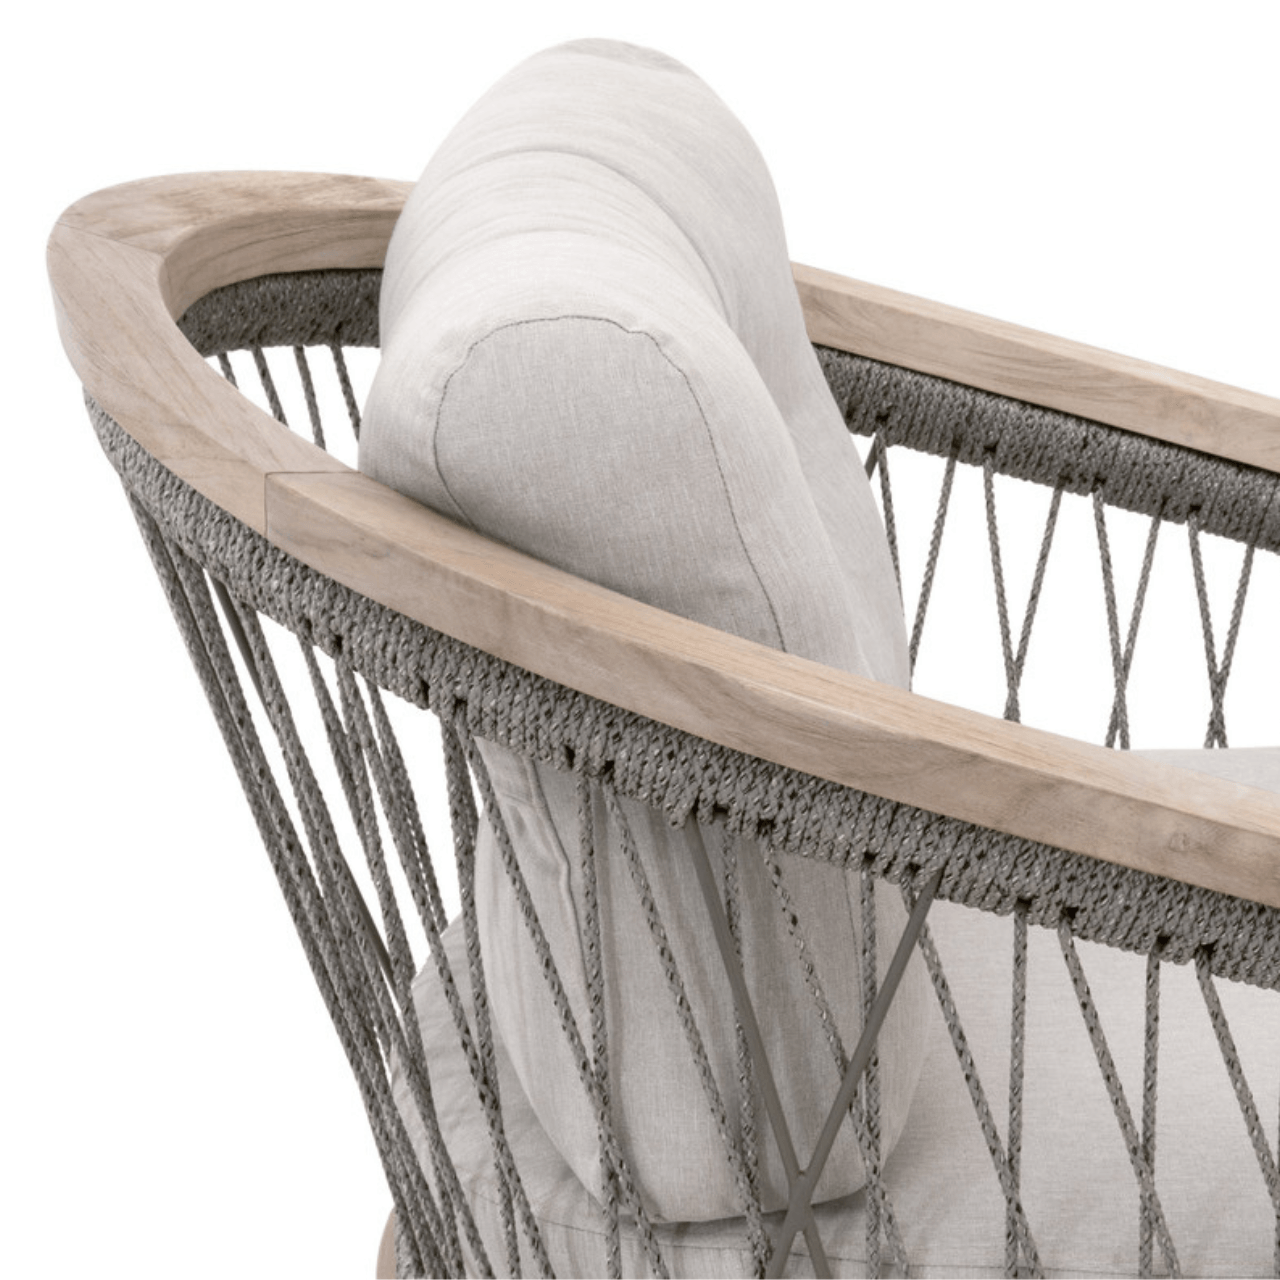 Woven Web Outdoor Club Chair